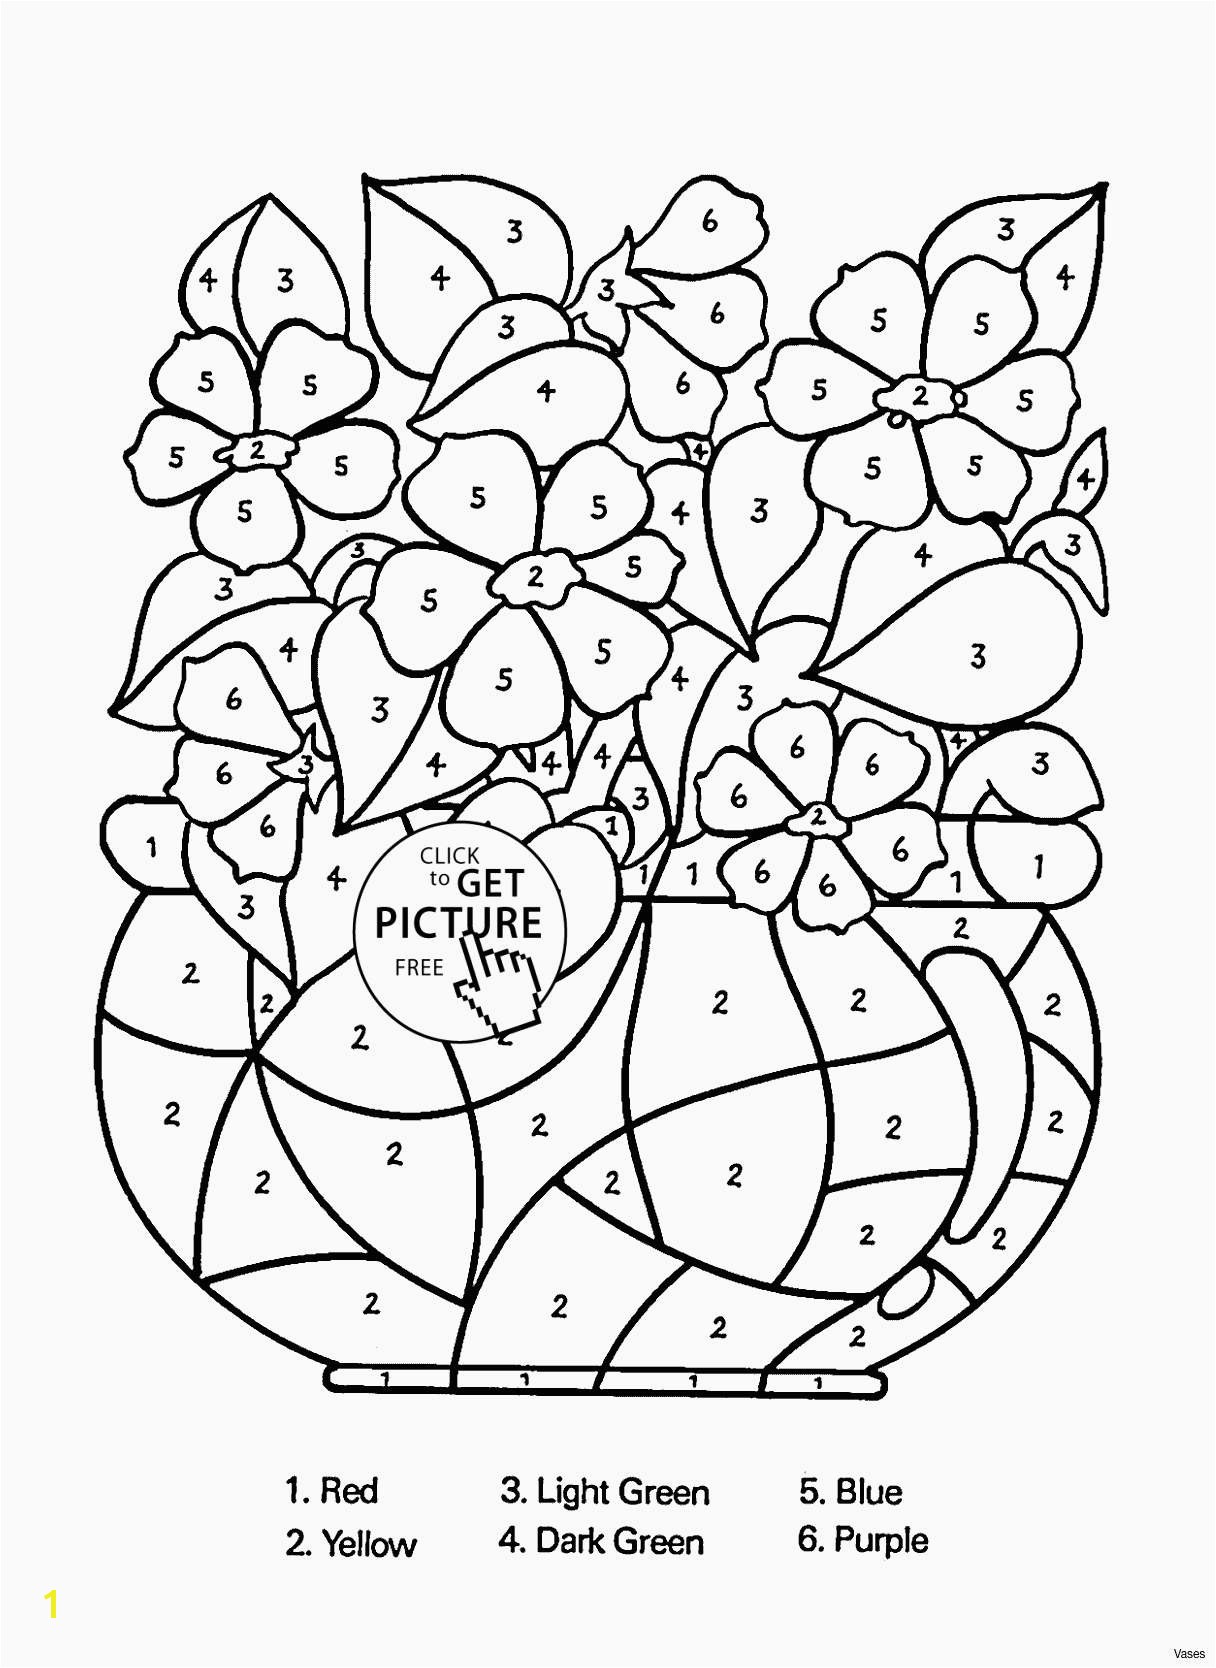 Disney Christmas Coloring Pages Printable 27 Christmas Coloring Pages for Free